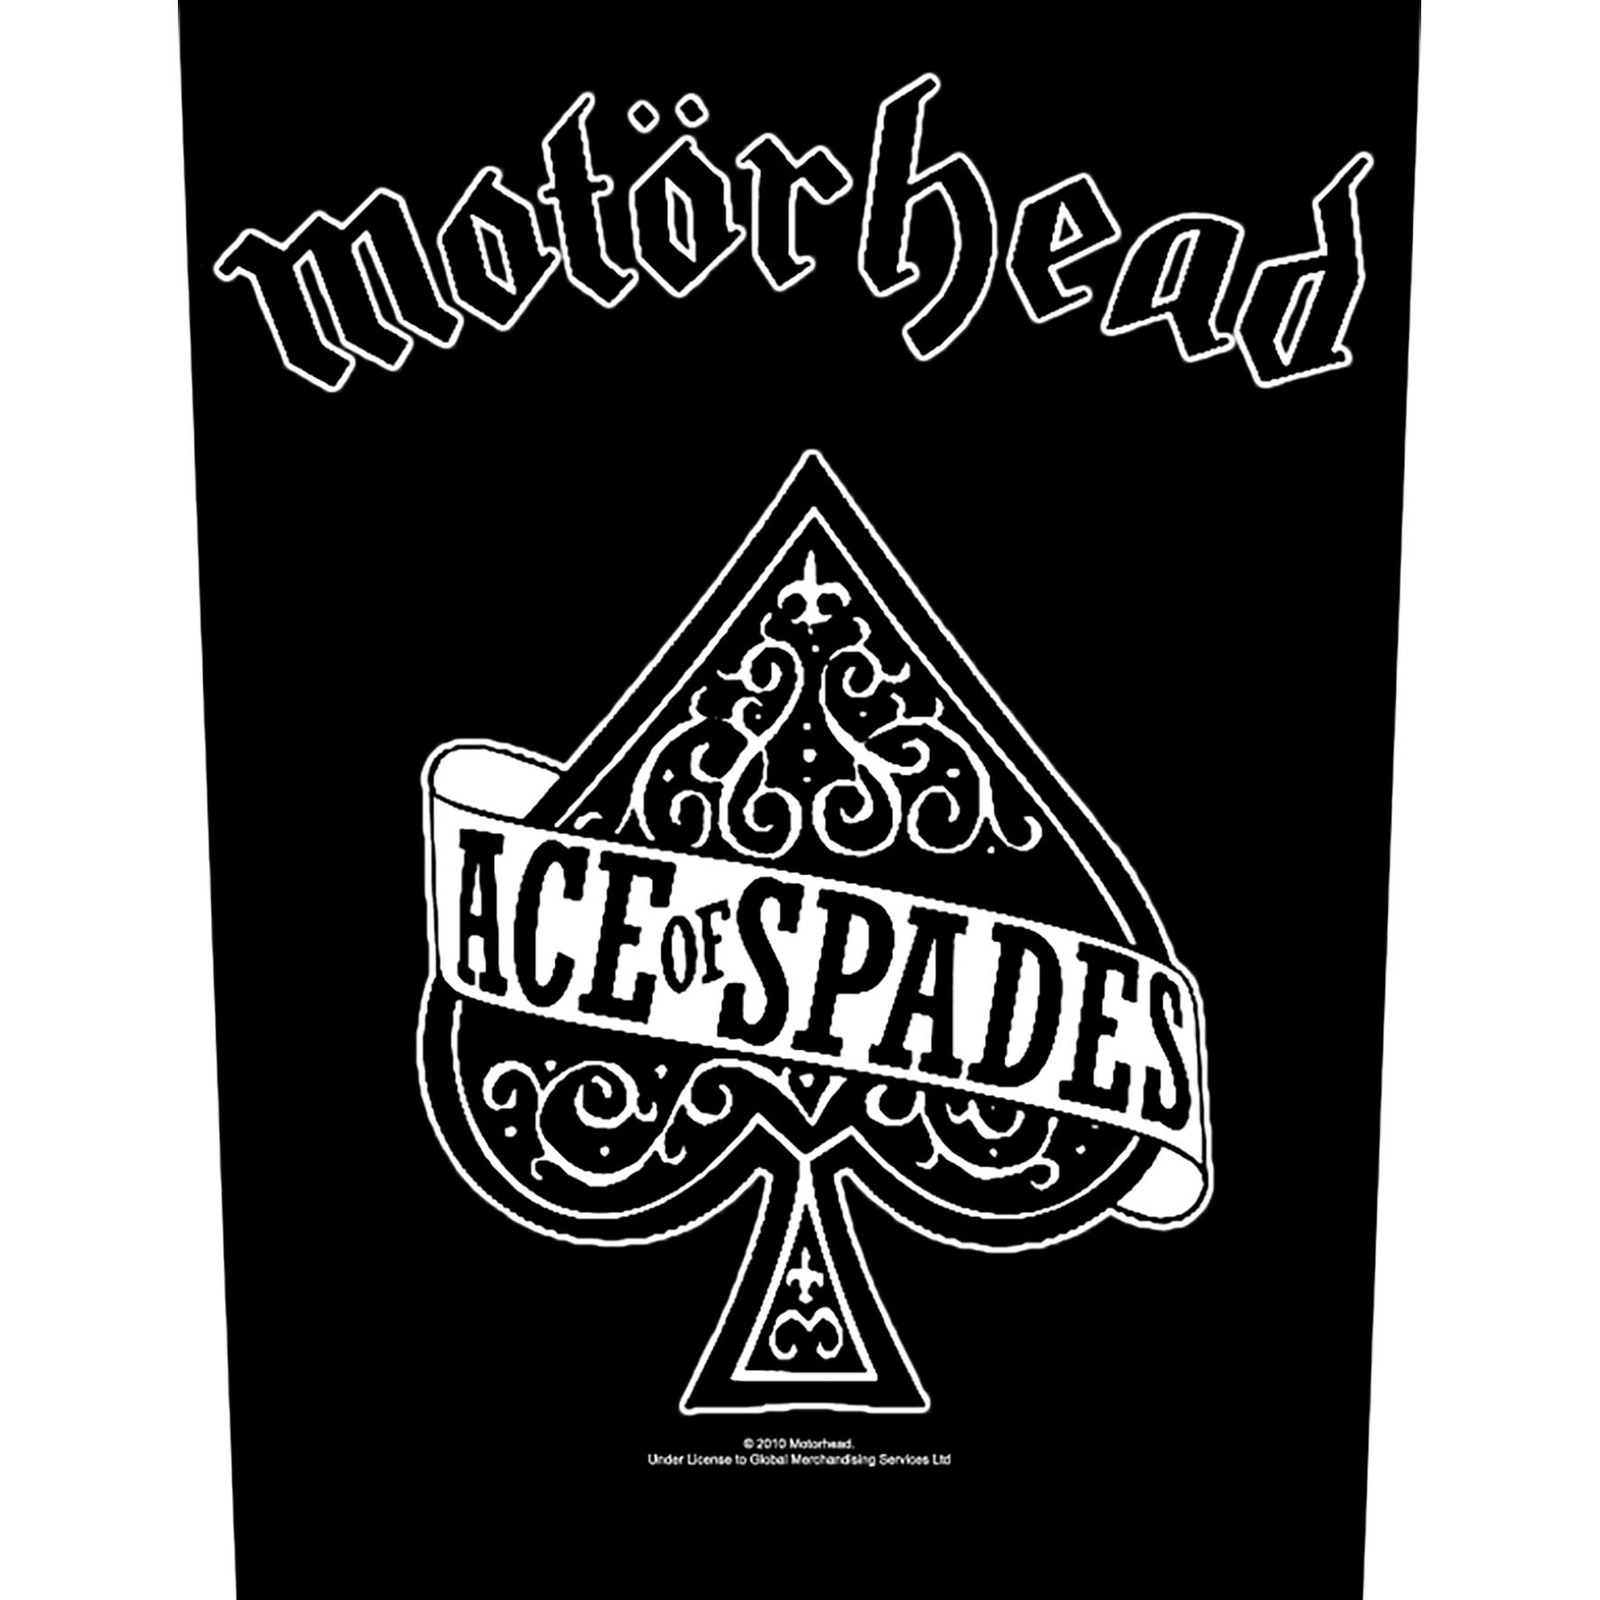 10" x 10" ACE OF SPADES with SKULL BACK PATCH 26CM x 26CM 